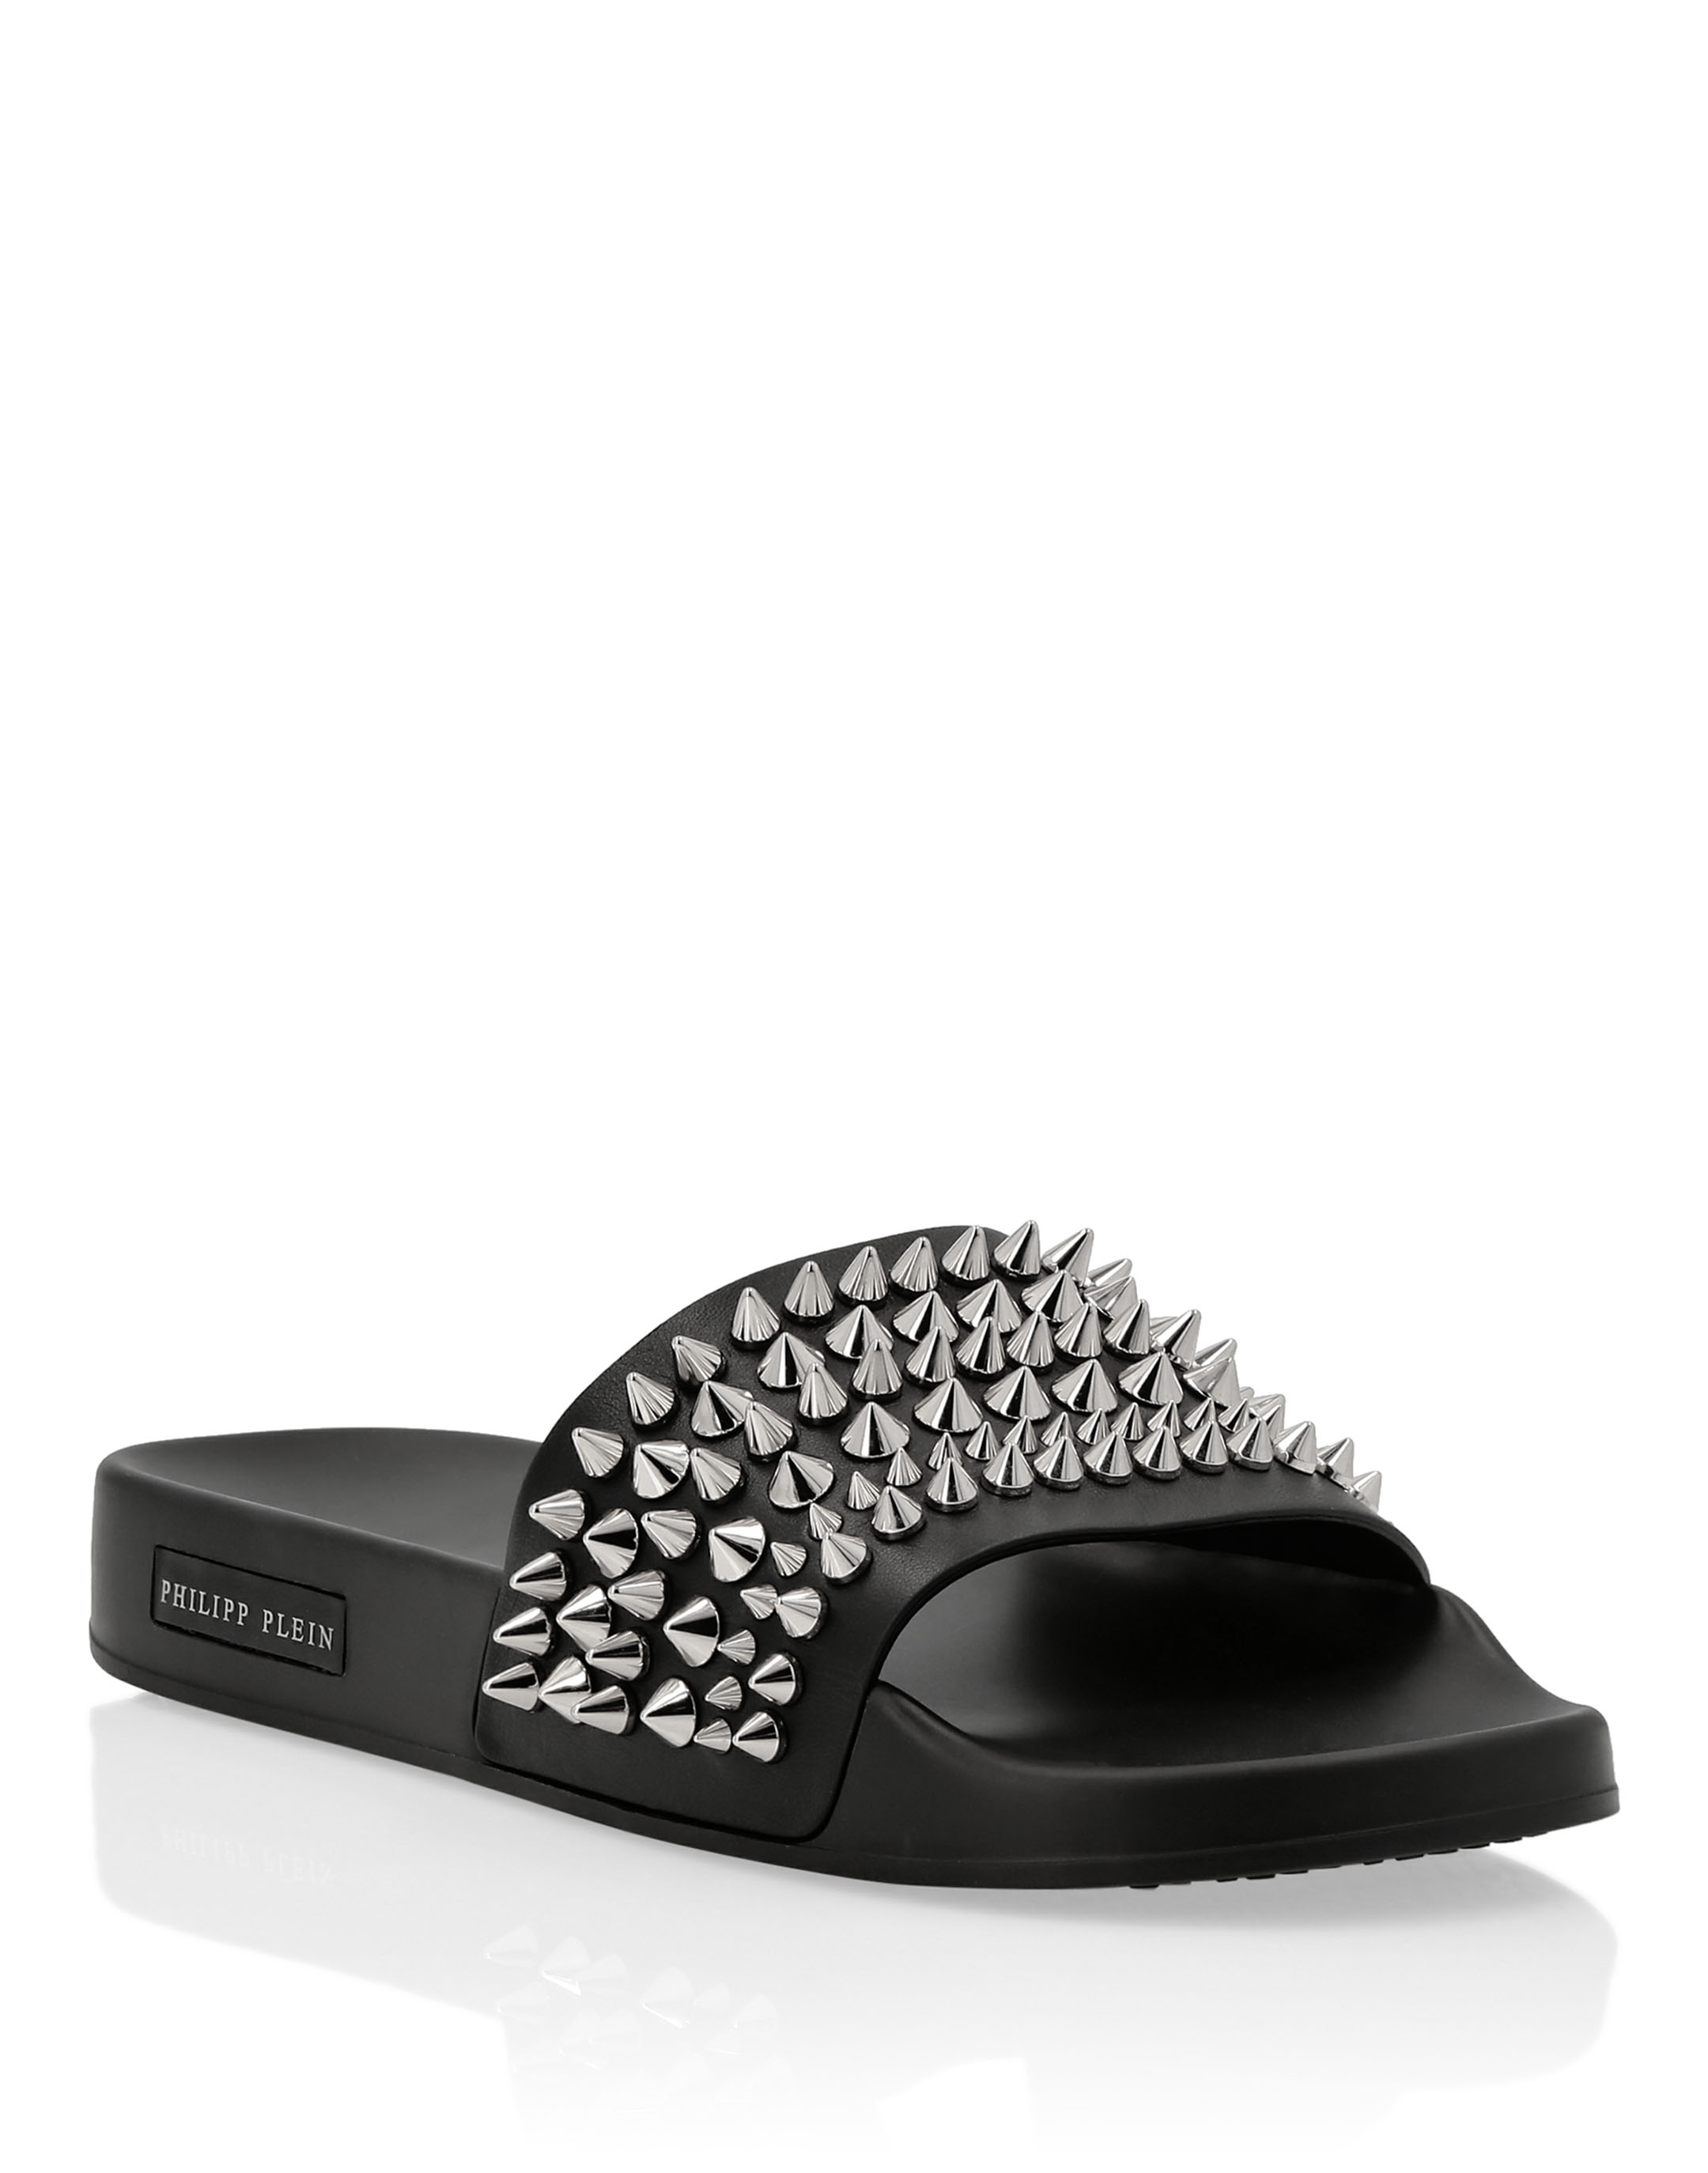 black flat sandals with silver studs